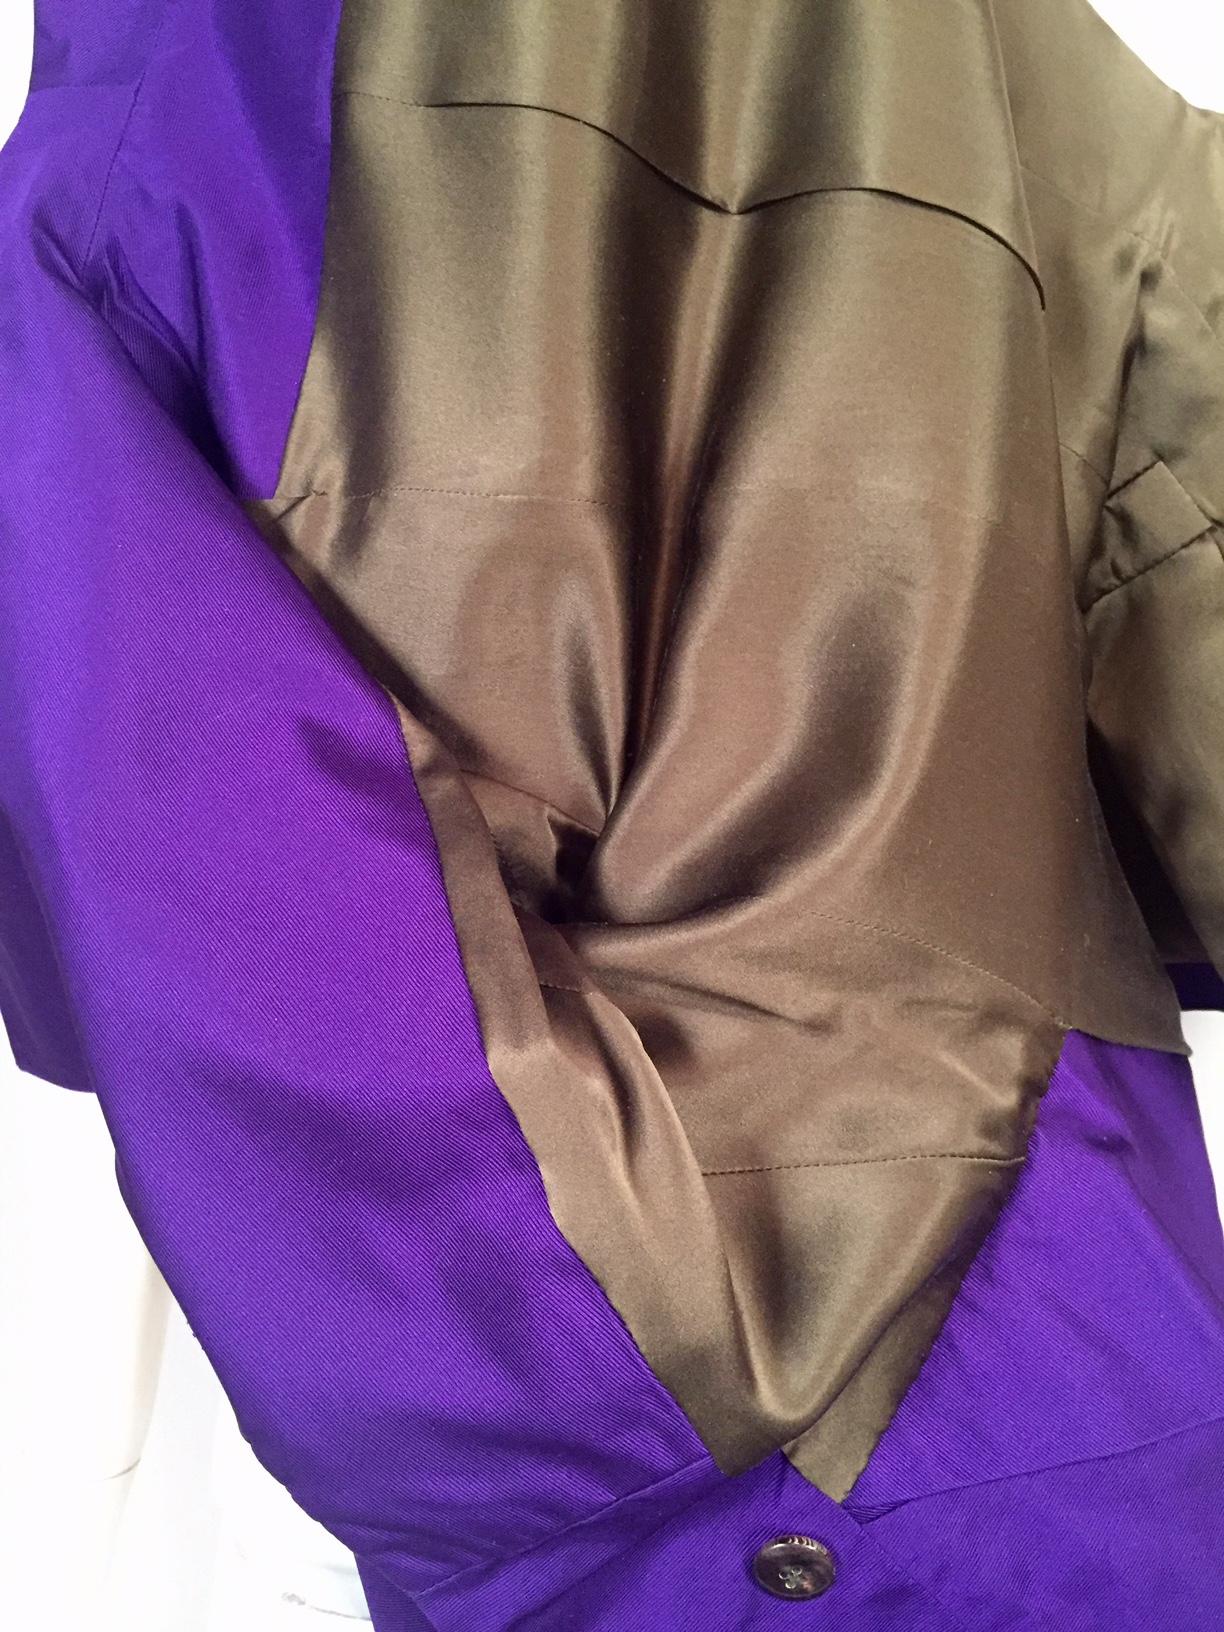 Royal Purple Edwardian Style Silk Faille Jacket by Maggie Norris Couture  For Sale 1